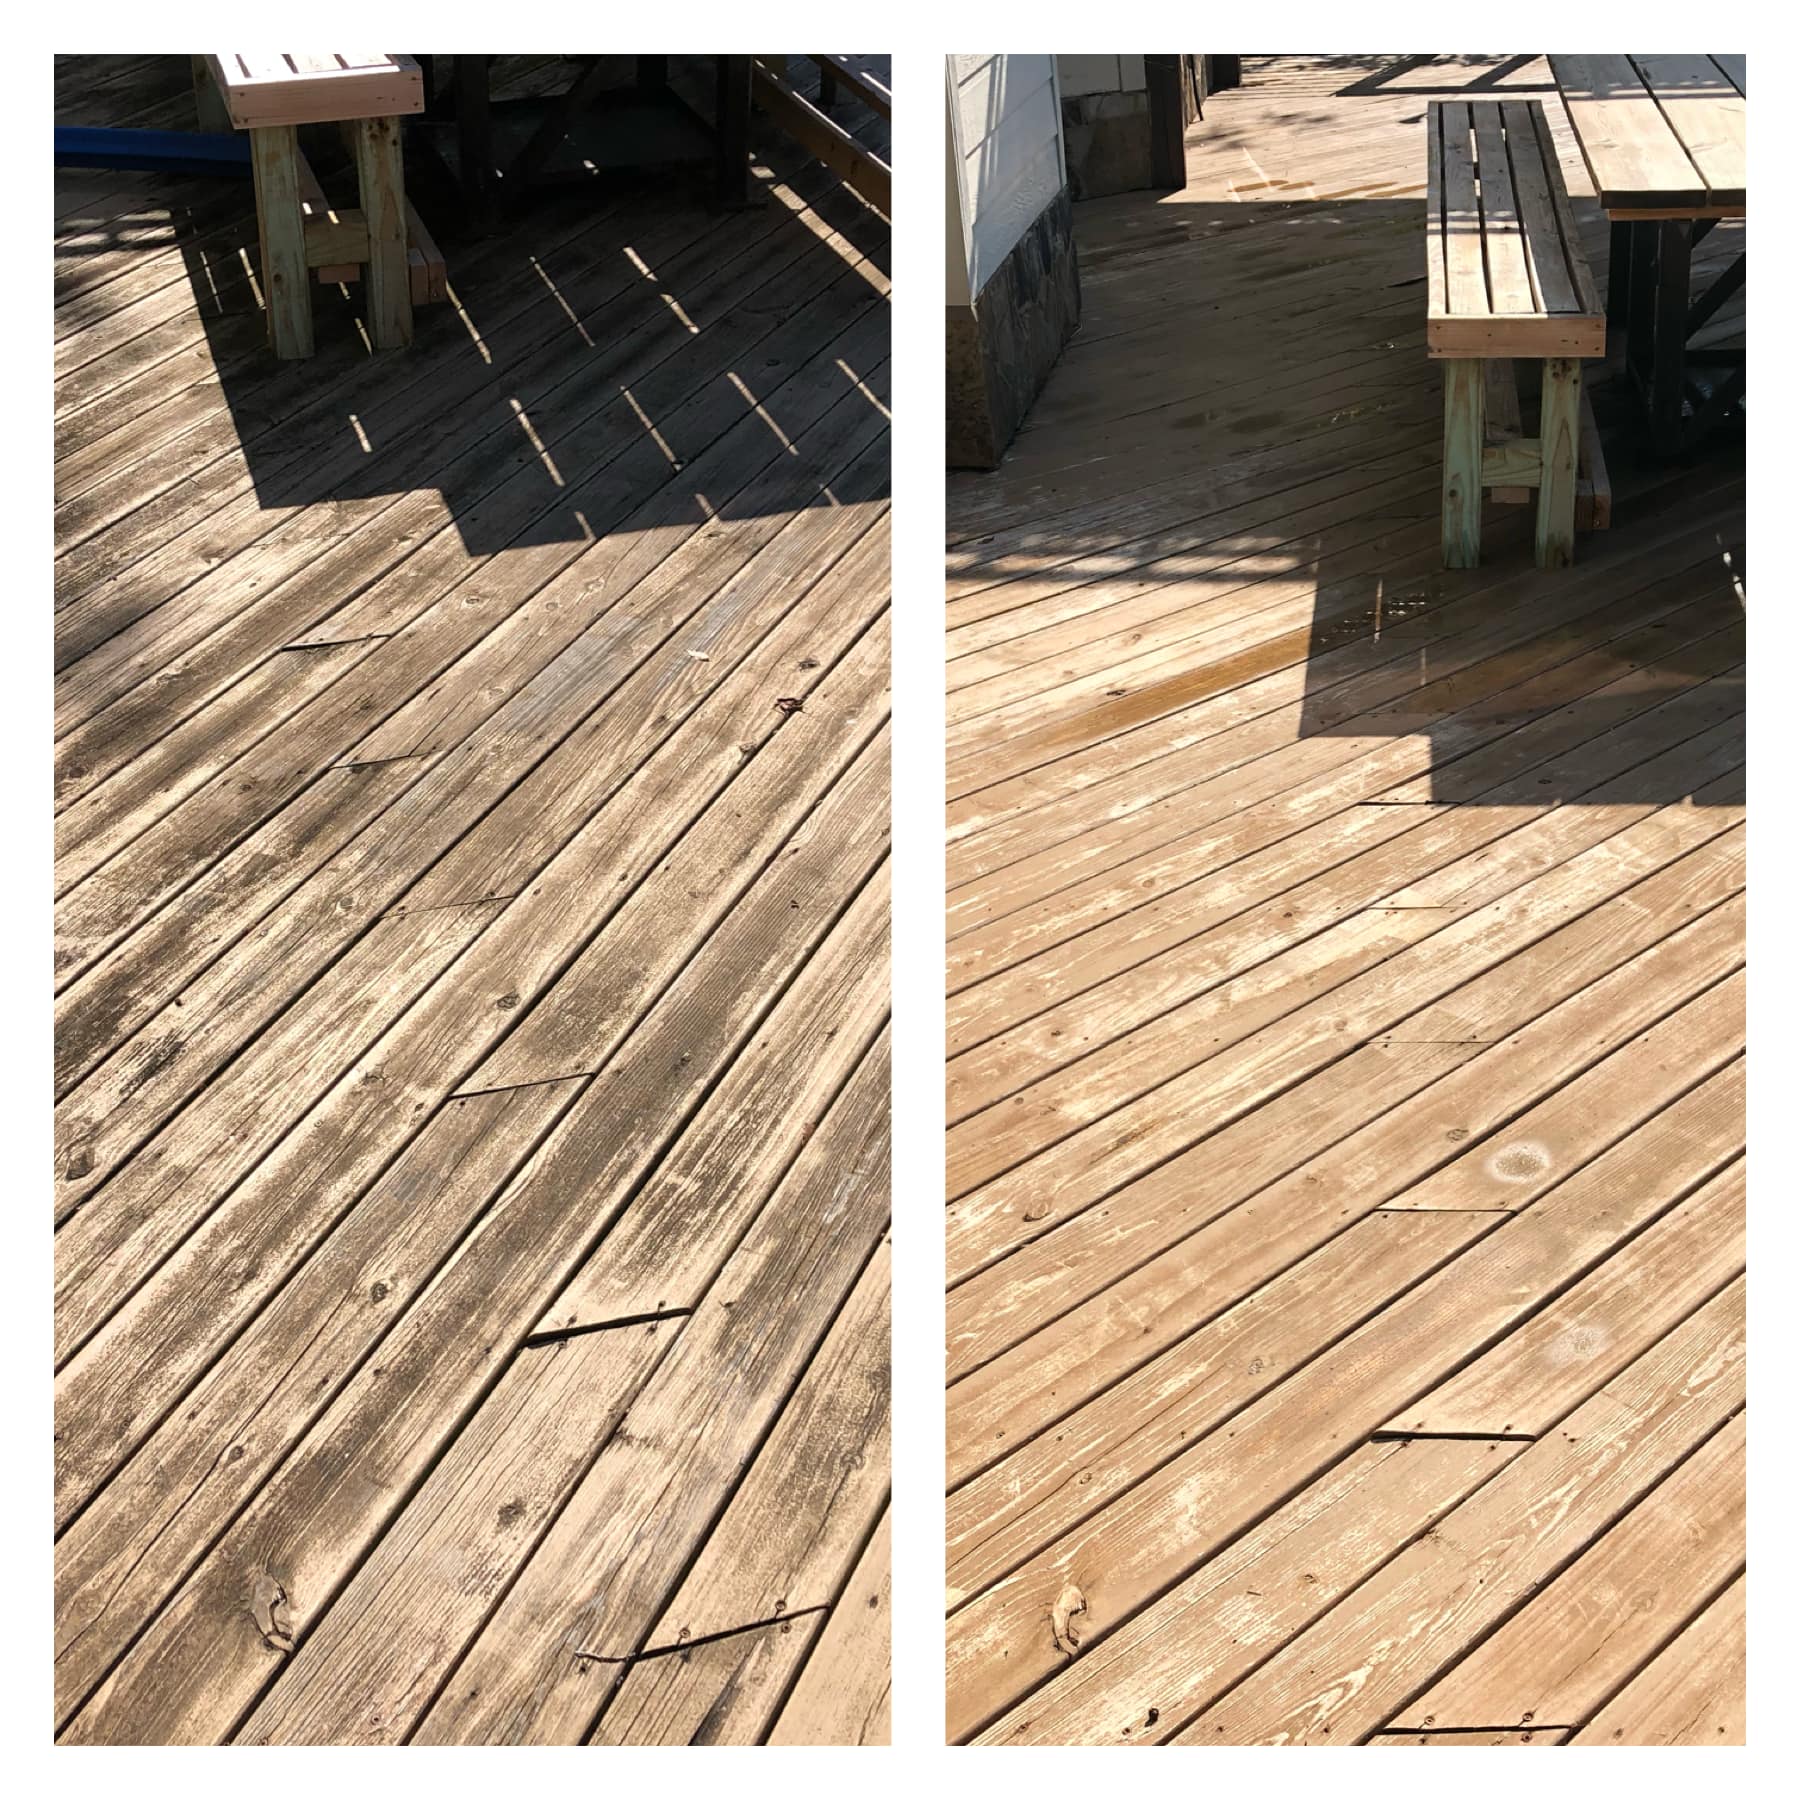 Deck pressure washing before and after the service is completed Hamilton Ontario